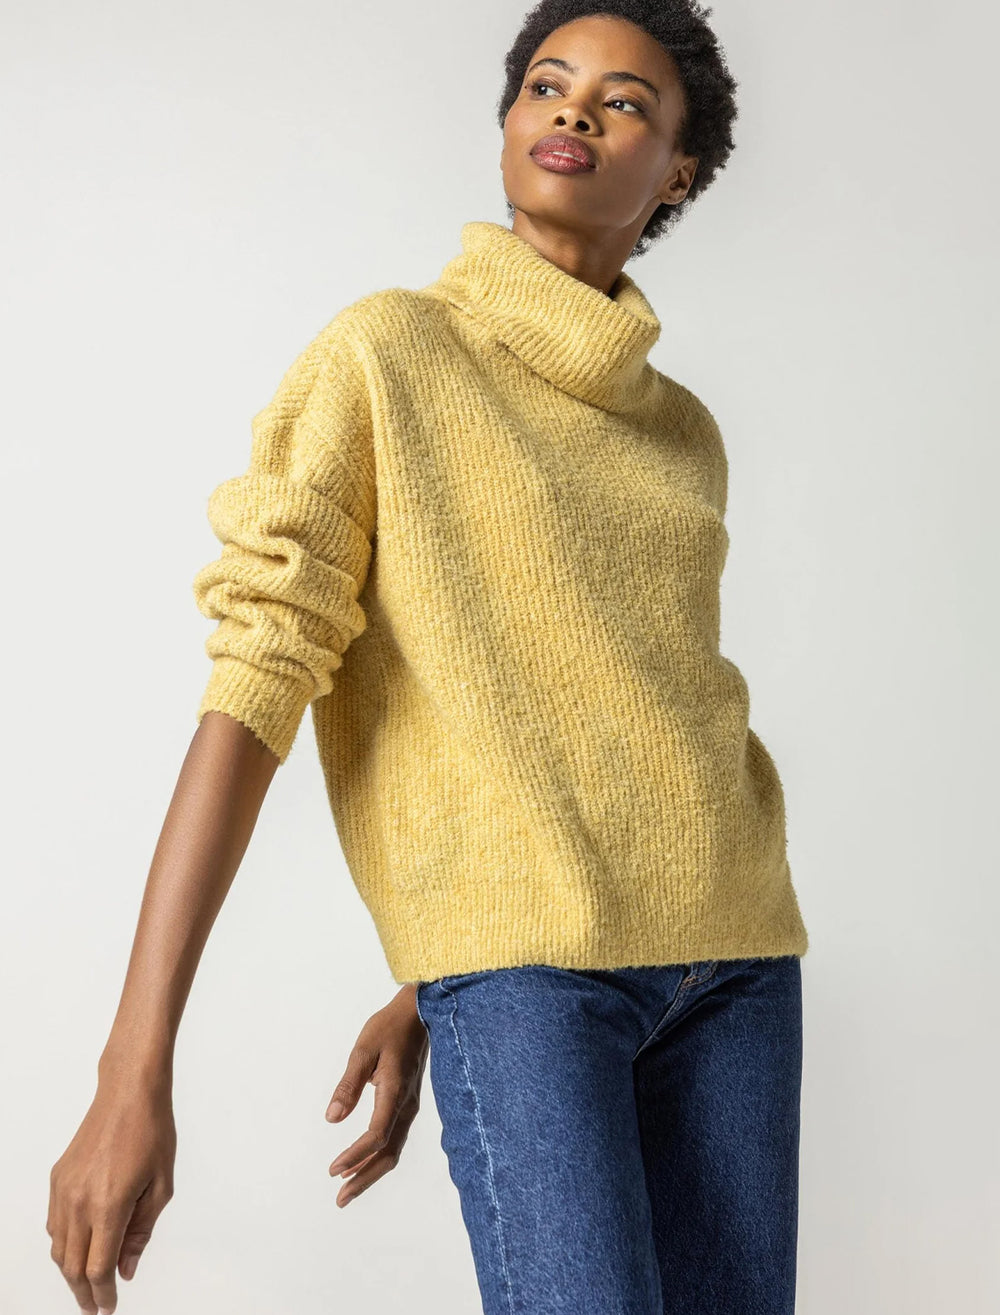 Model wearing Lilla P.'s oversized ribbed turtleneck in gold dust.